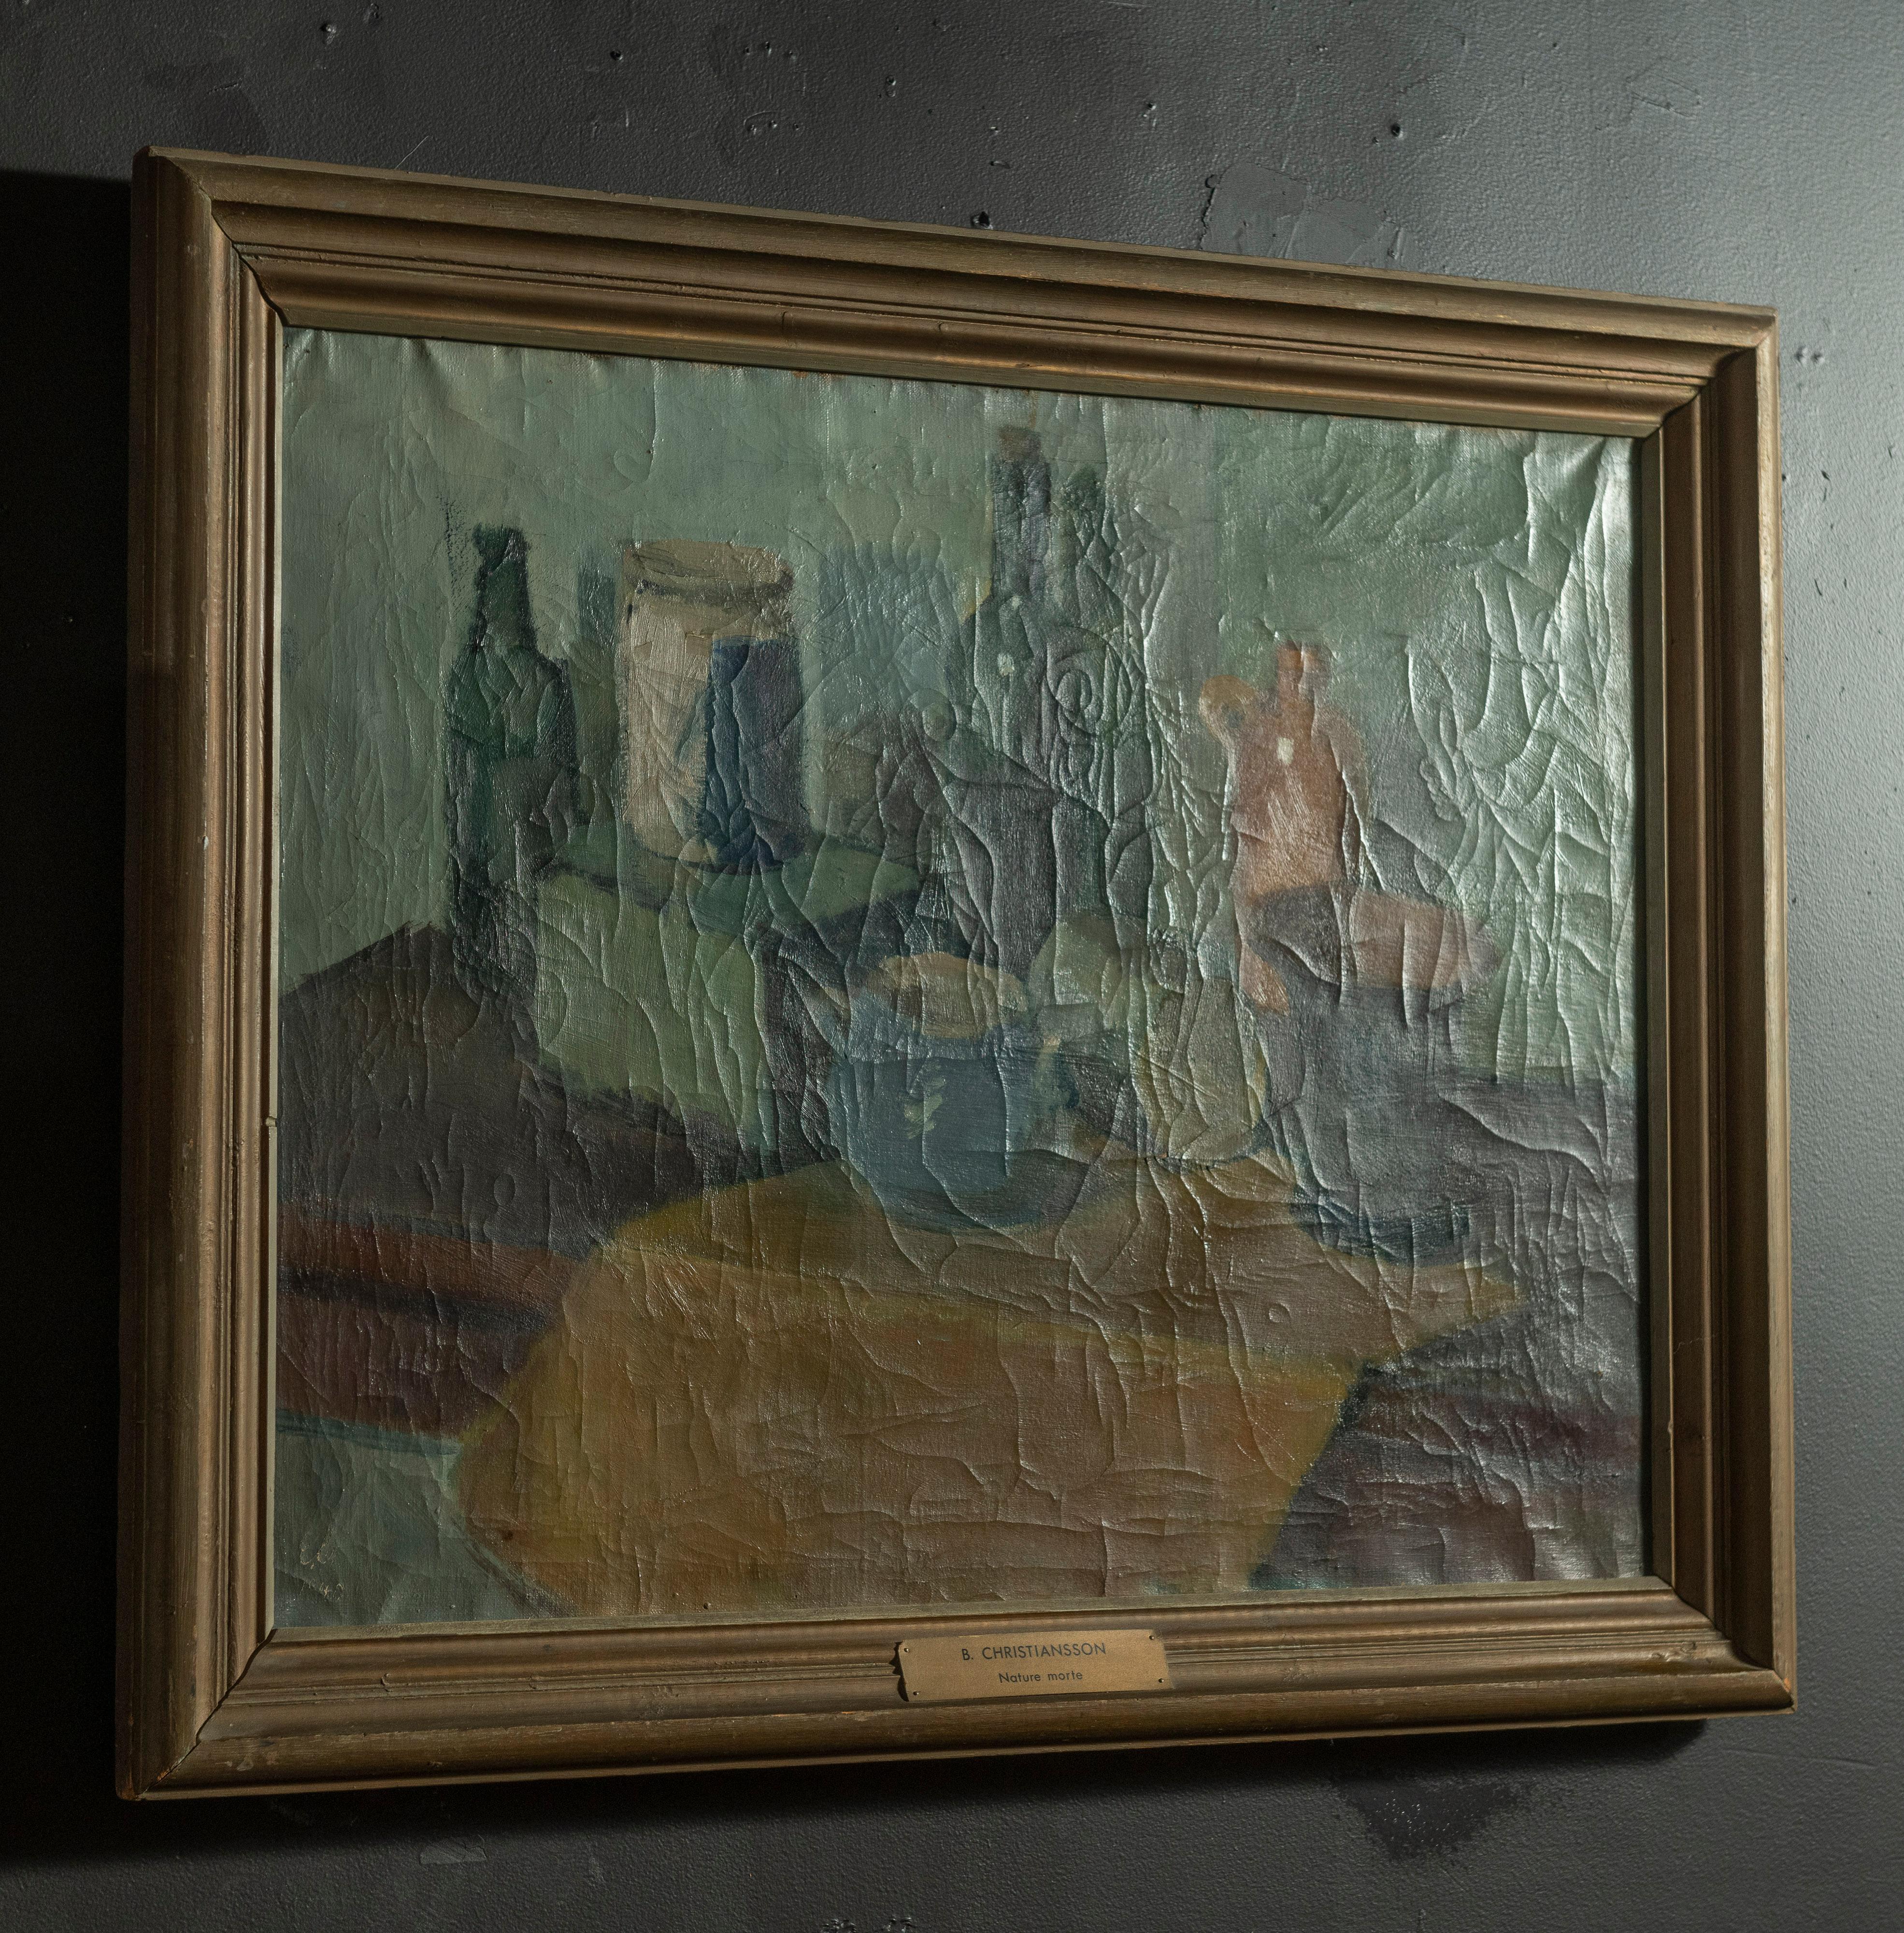 This quiet vintage midcentury still life oil painting is framed and signed by B. Christiansson, well known Swedish artist. In muted shades of mostly green and blue, the artist features various vessels on a table. The canvas has a lovely patina and